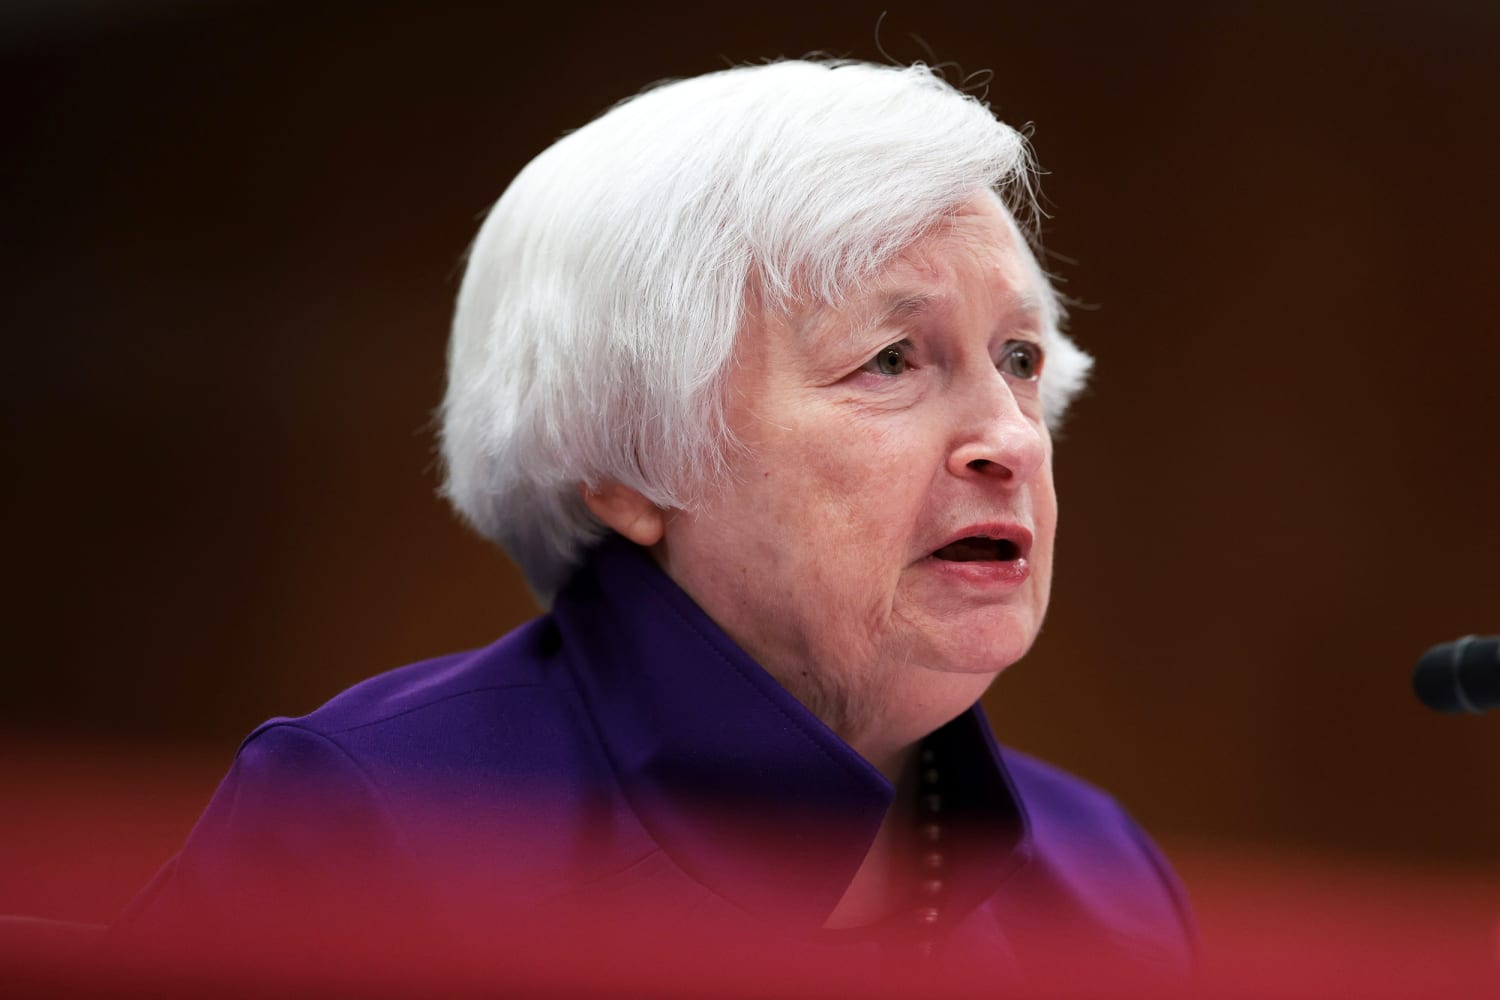 The U.S. now has until June 5 to act on the debt ceiling, Yellen says